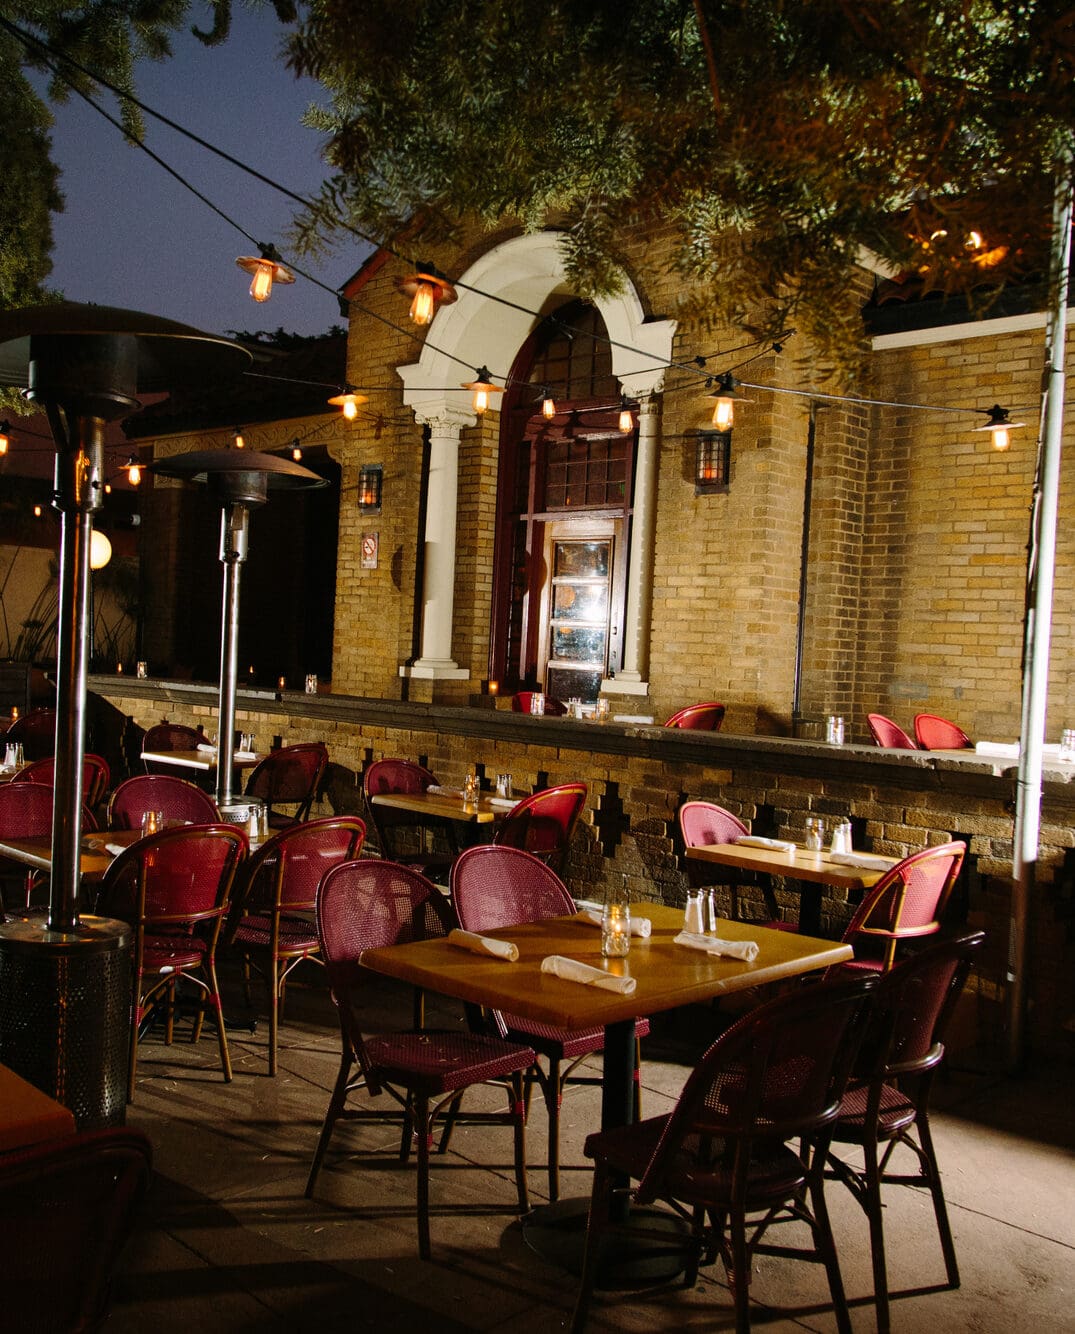 The best restaurants in Silver Lake | the Edendale outdoor patio strung with lights